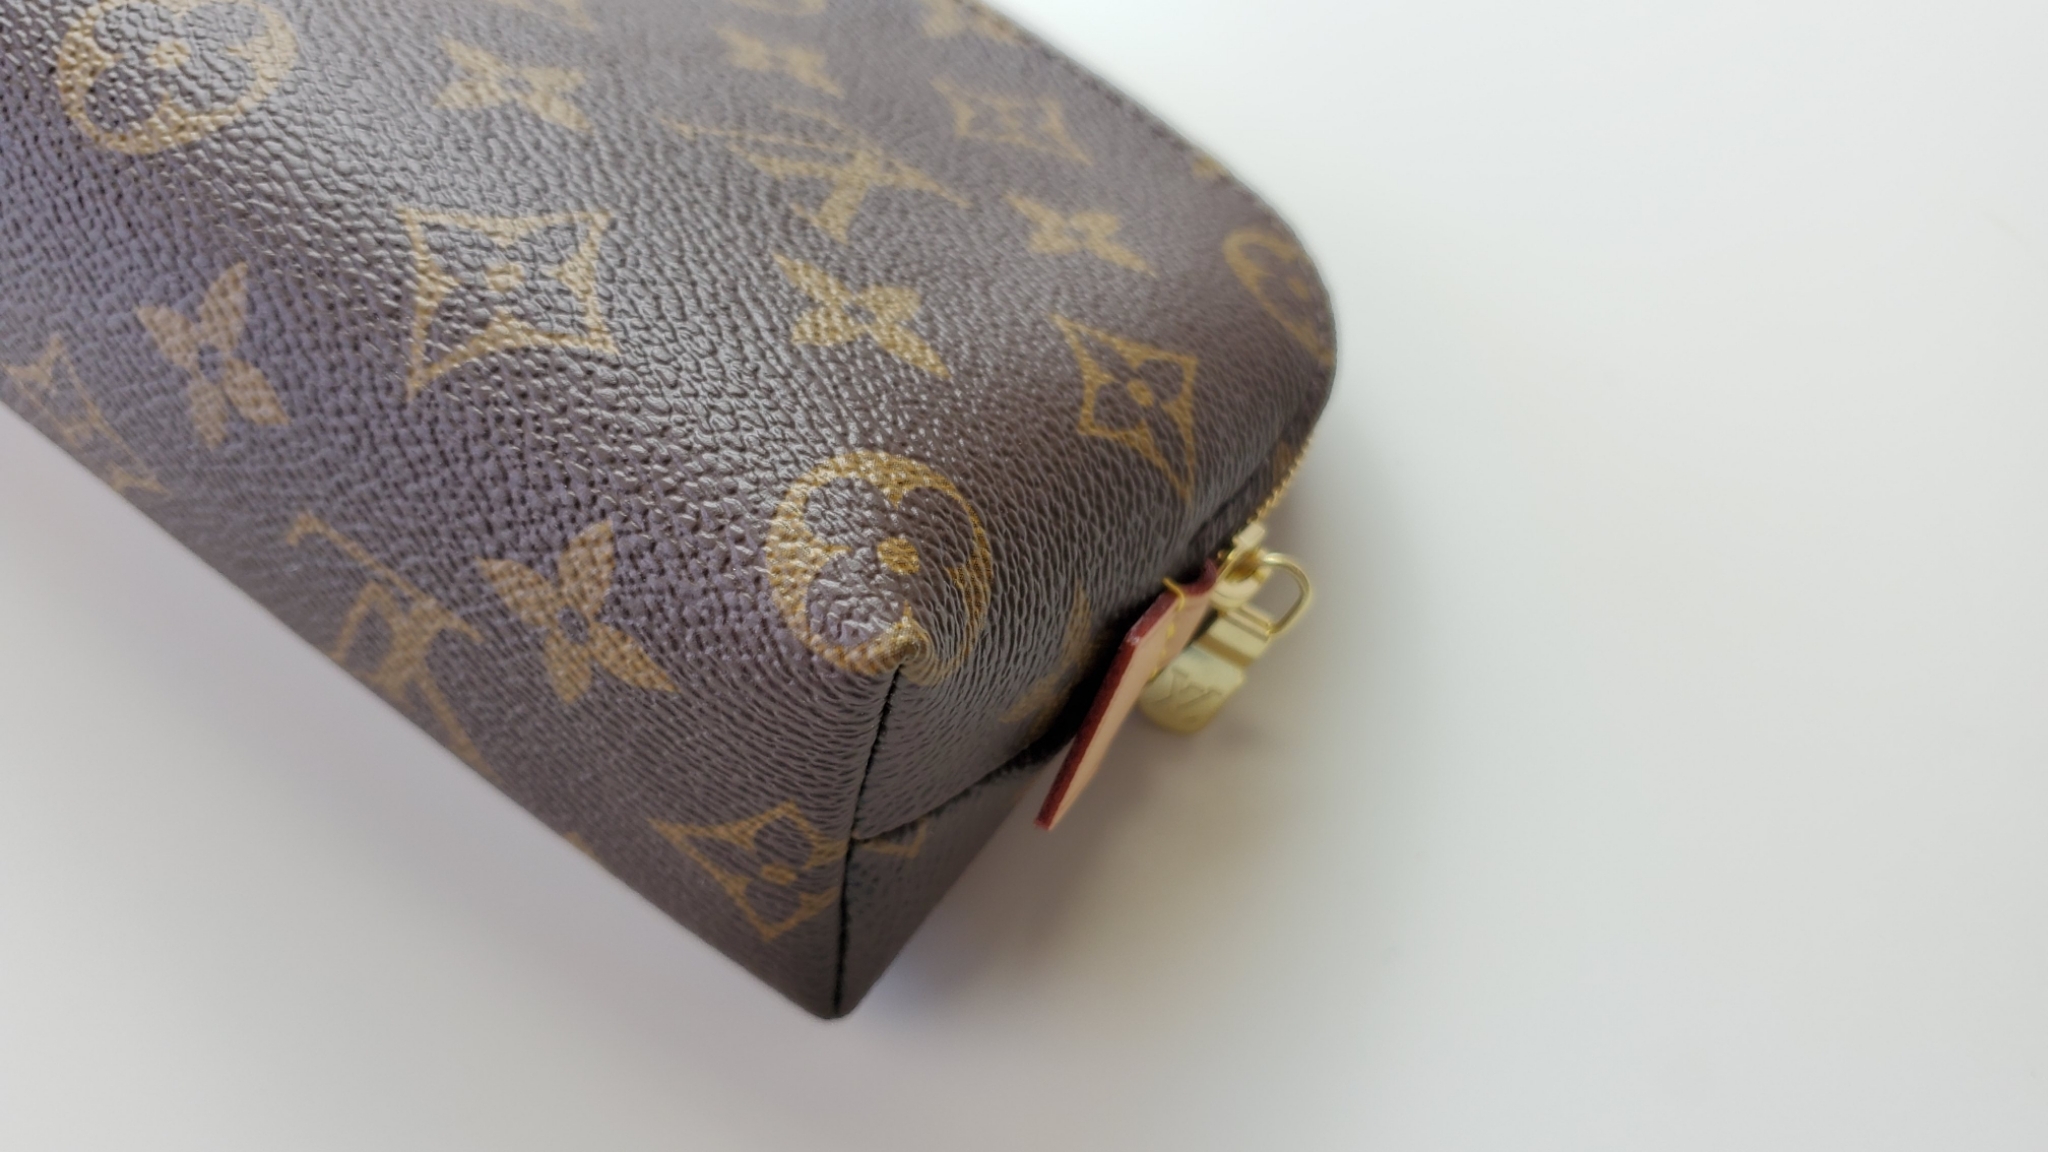 Pre-Owned Luxury Handbags Louis Vuitton Makeup Pouch – Spicer